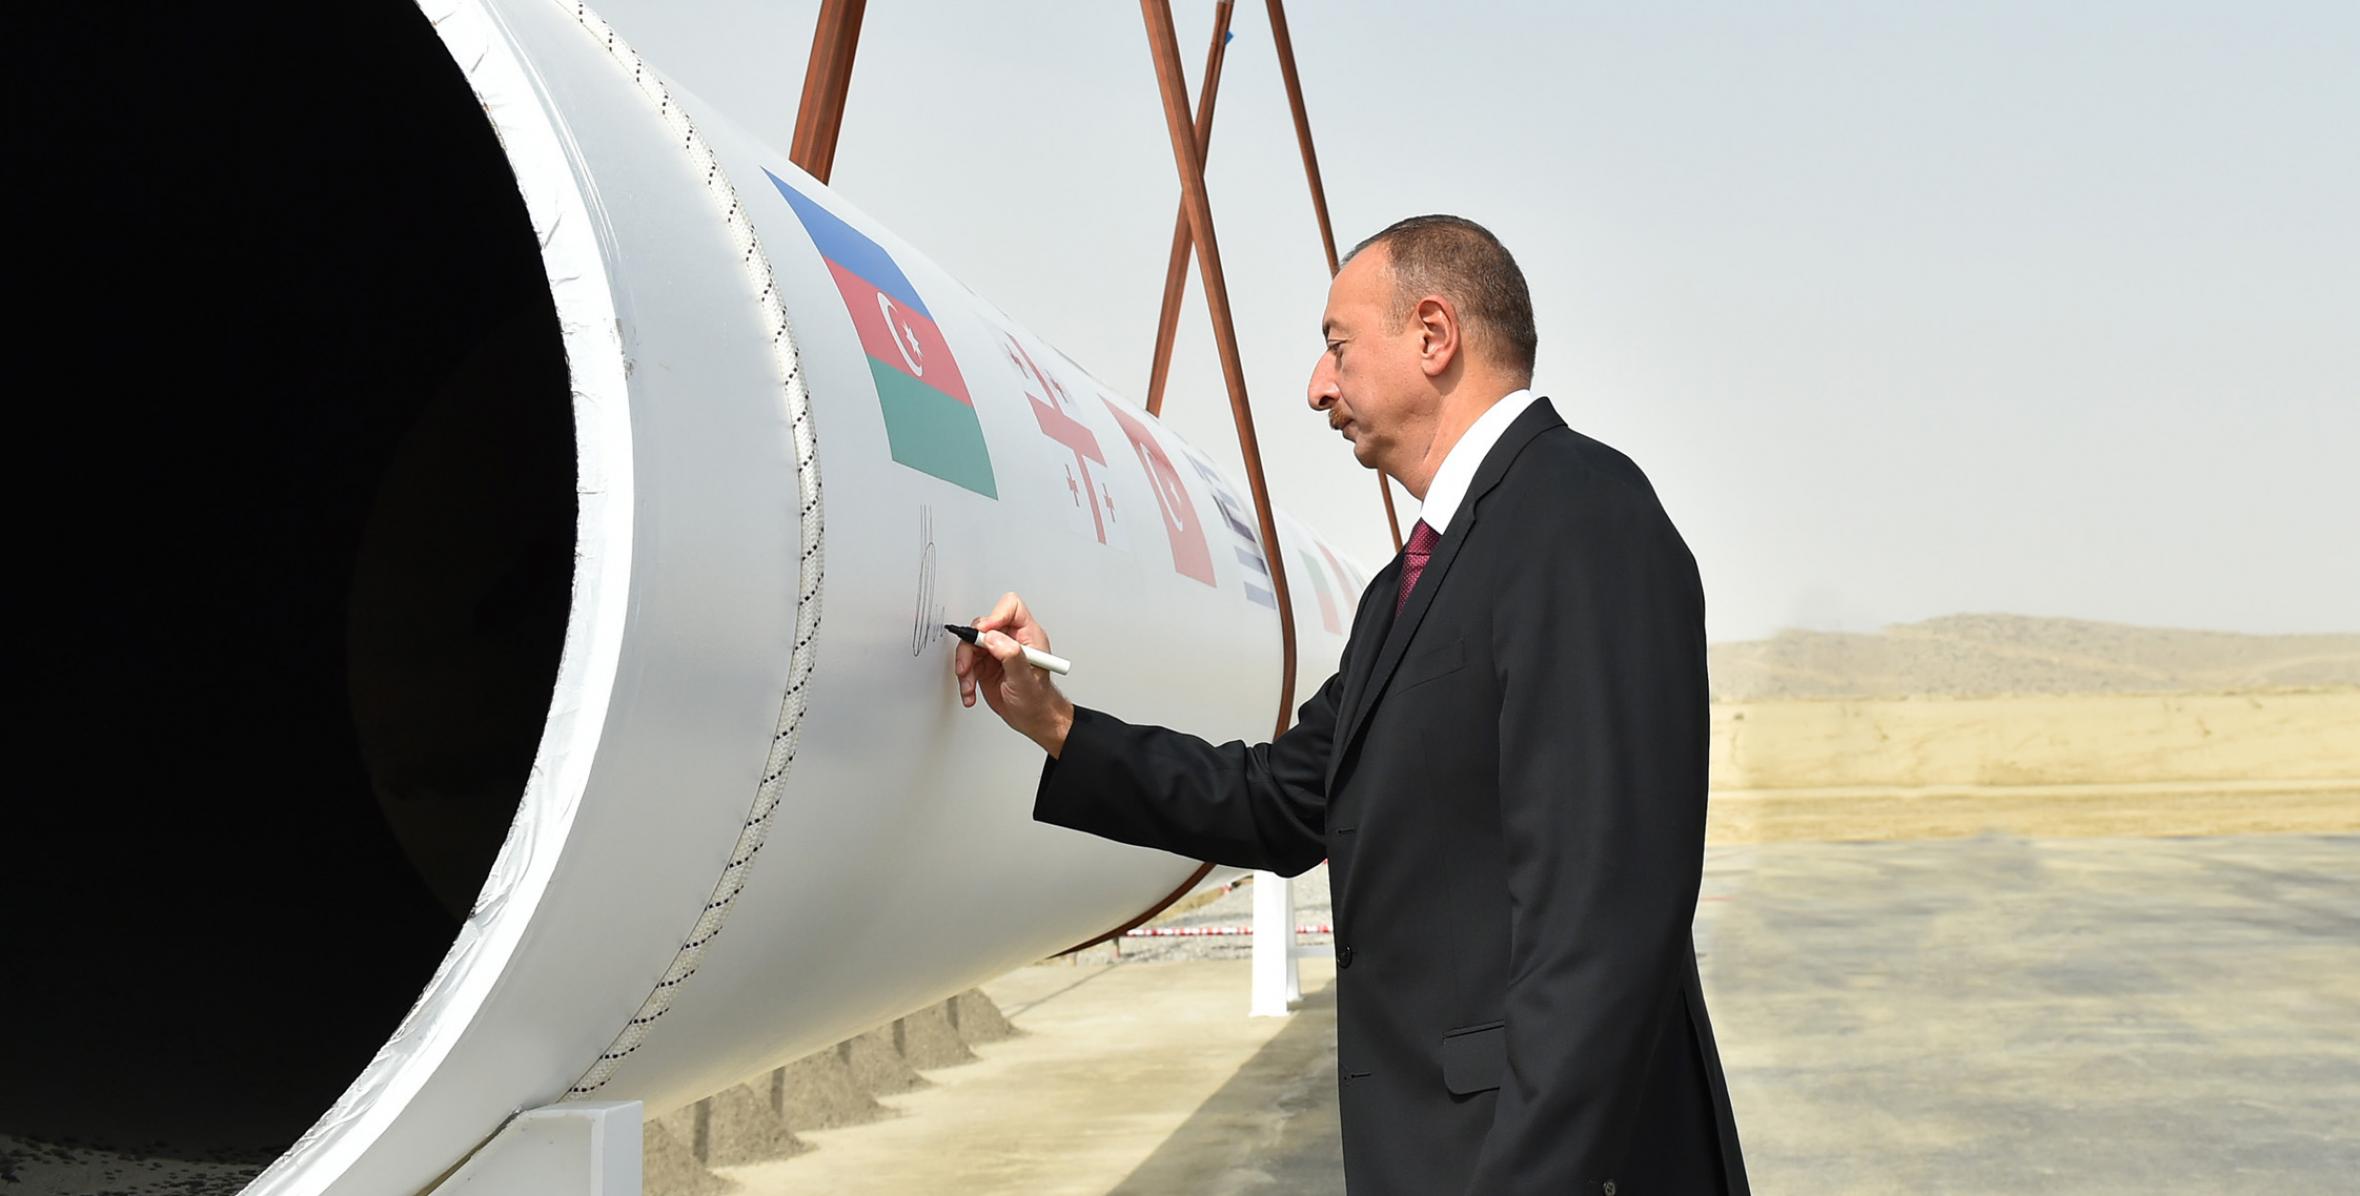 Ilham Aliyev, the heads of state and government attended the ceremony to mark the 20th anniversary of the Contract of the Century and lay the foundation of the Southern Gas Corridor